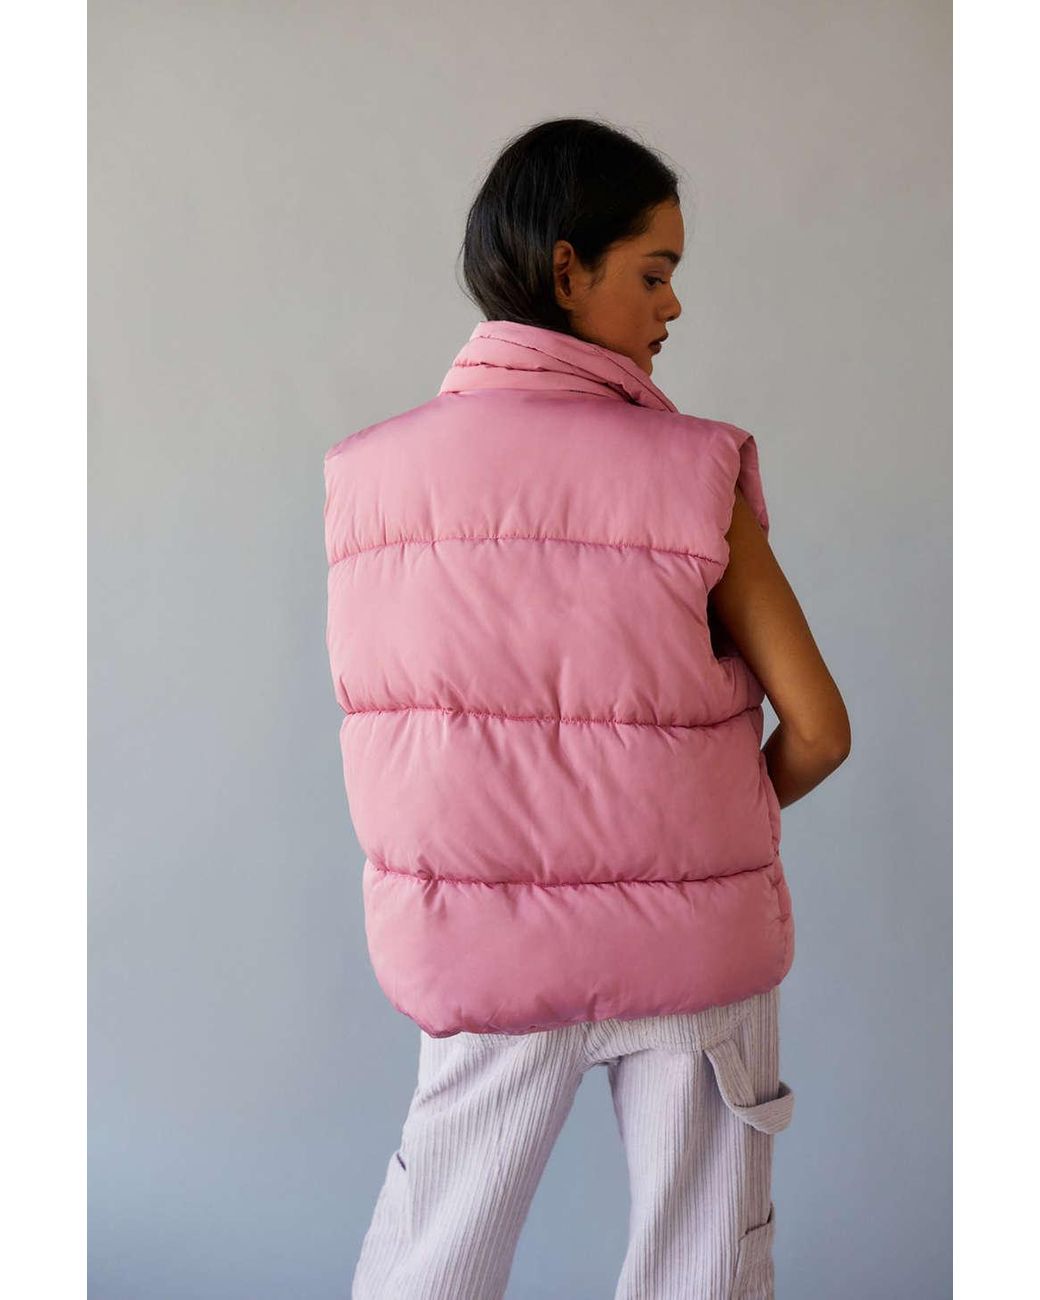 Urban Outfitters Uo Corrine Puffer Vest in Pink | Lyst